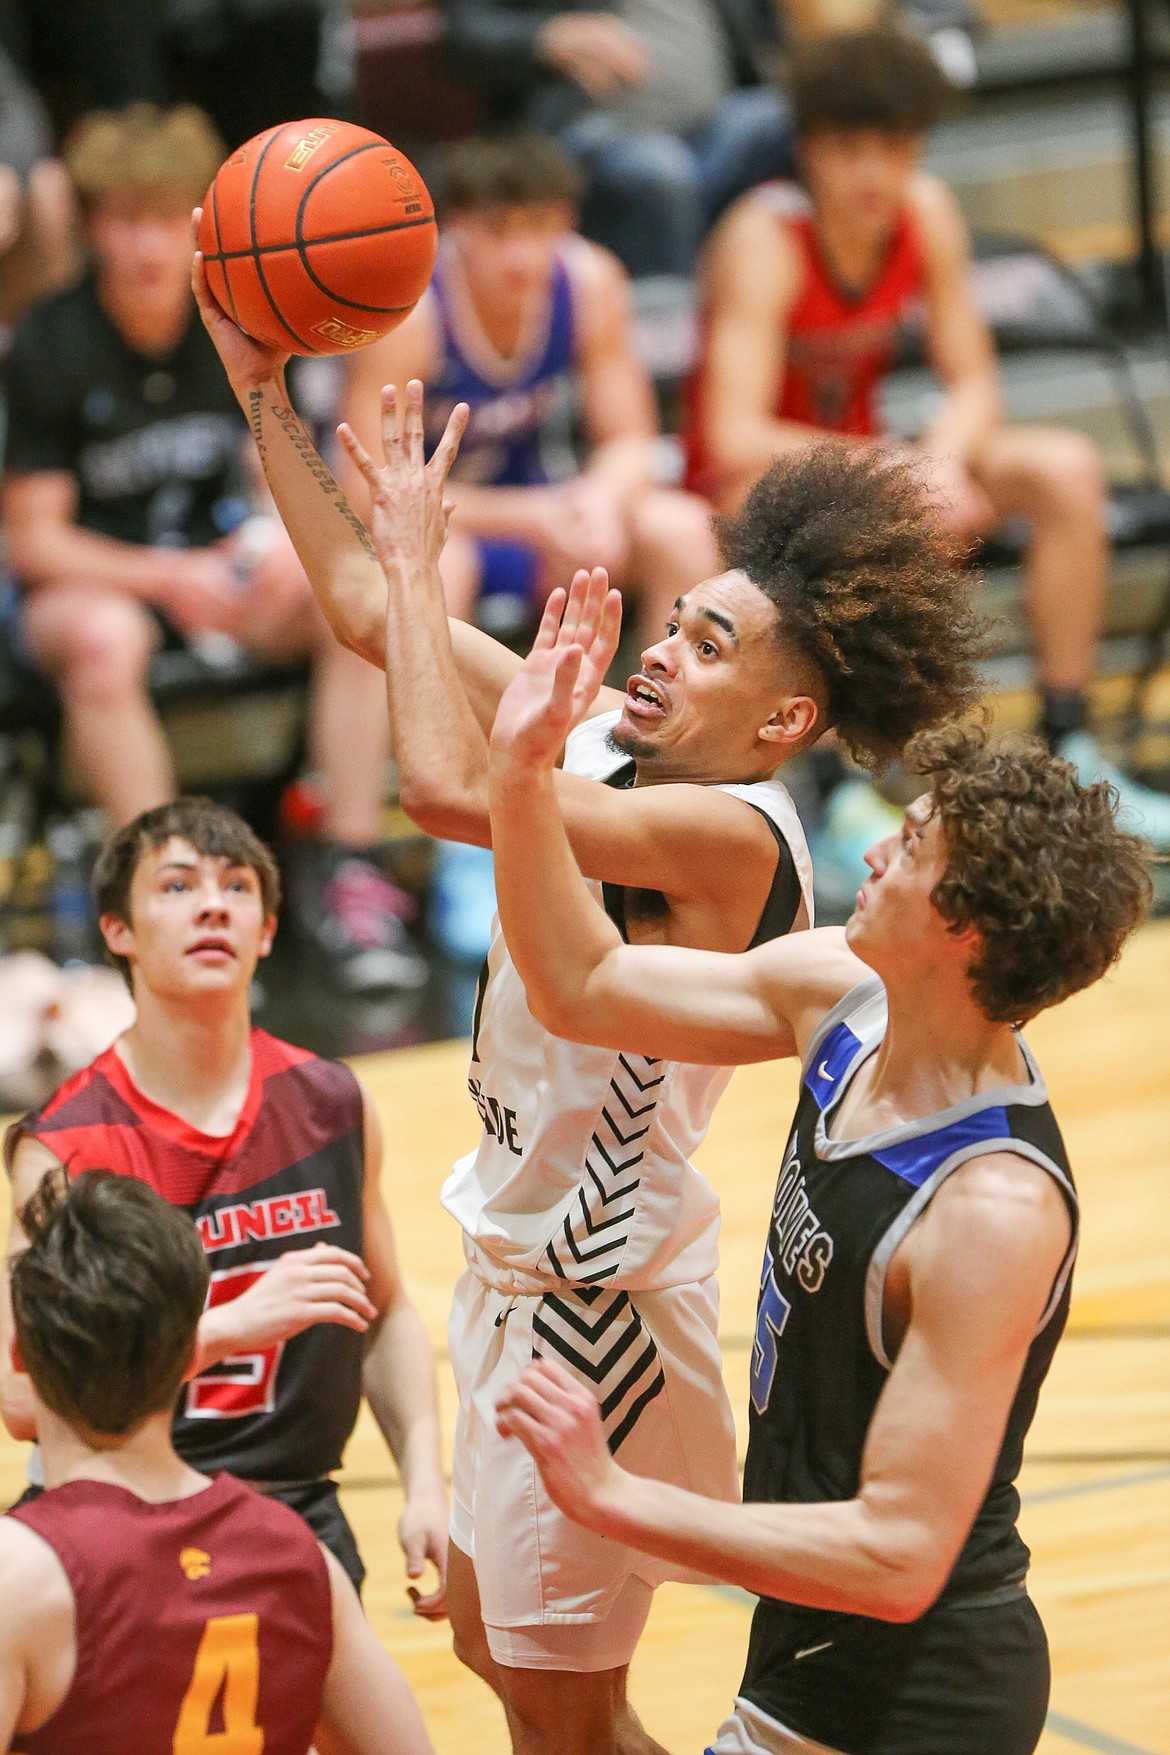 JASON DUCHOW PHOTOGRAPHY
Lakeside senior guard Vander Brown drives into the key during the first half of the 20th annual boys Idaho High School All-Star Basketball Game at North Idaho College.